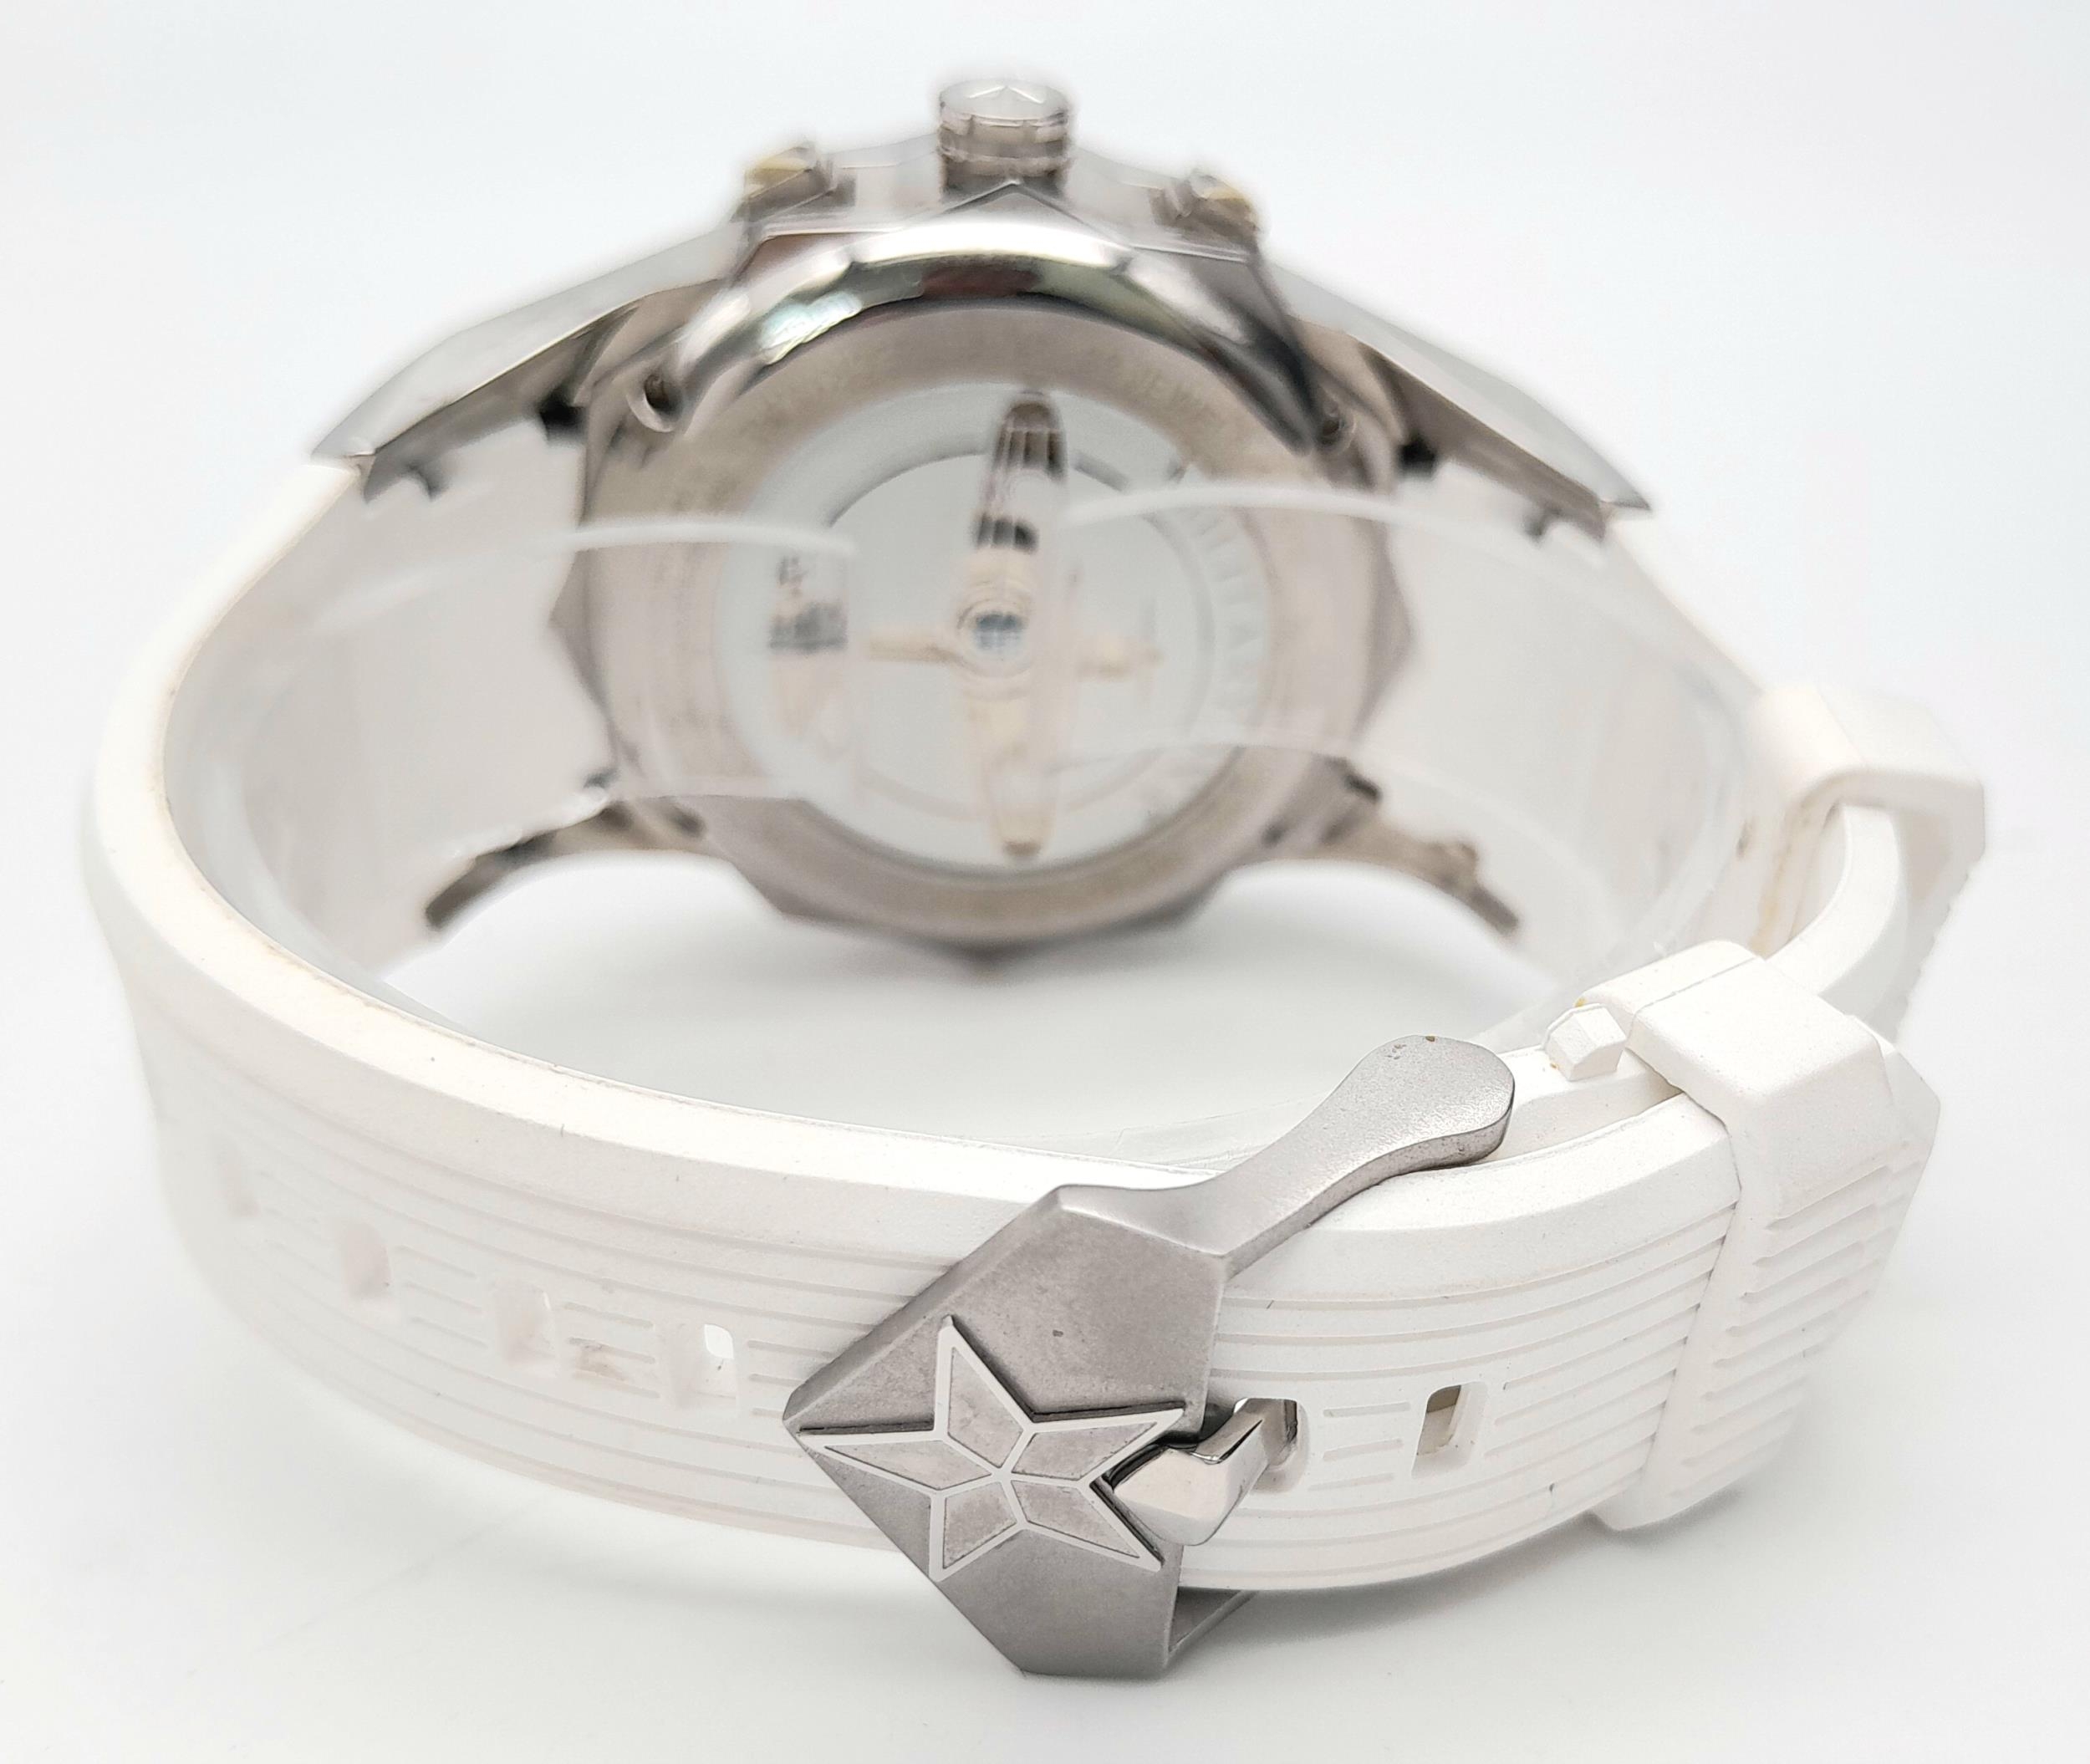 An Unworn, Military DNA, Automatic Chronograph Watch Commemorating the WW2 Japanese Zero Aircraft. - Image 5 of 10